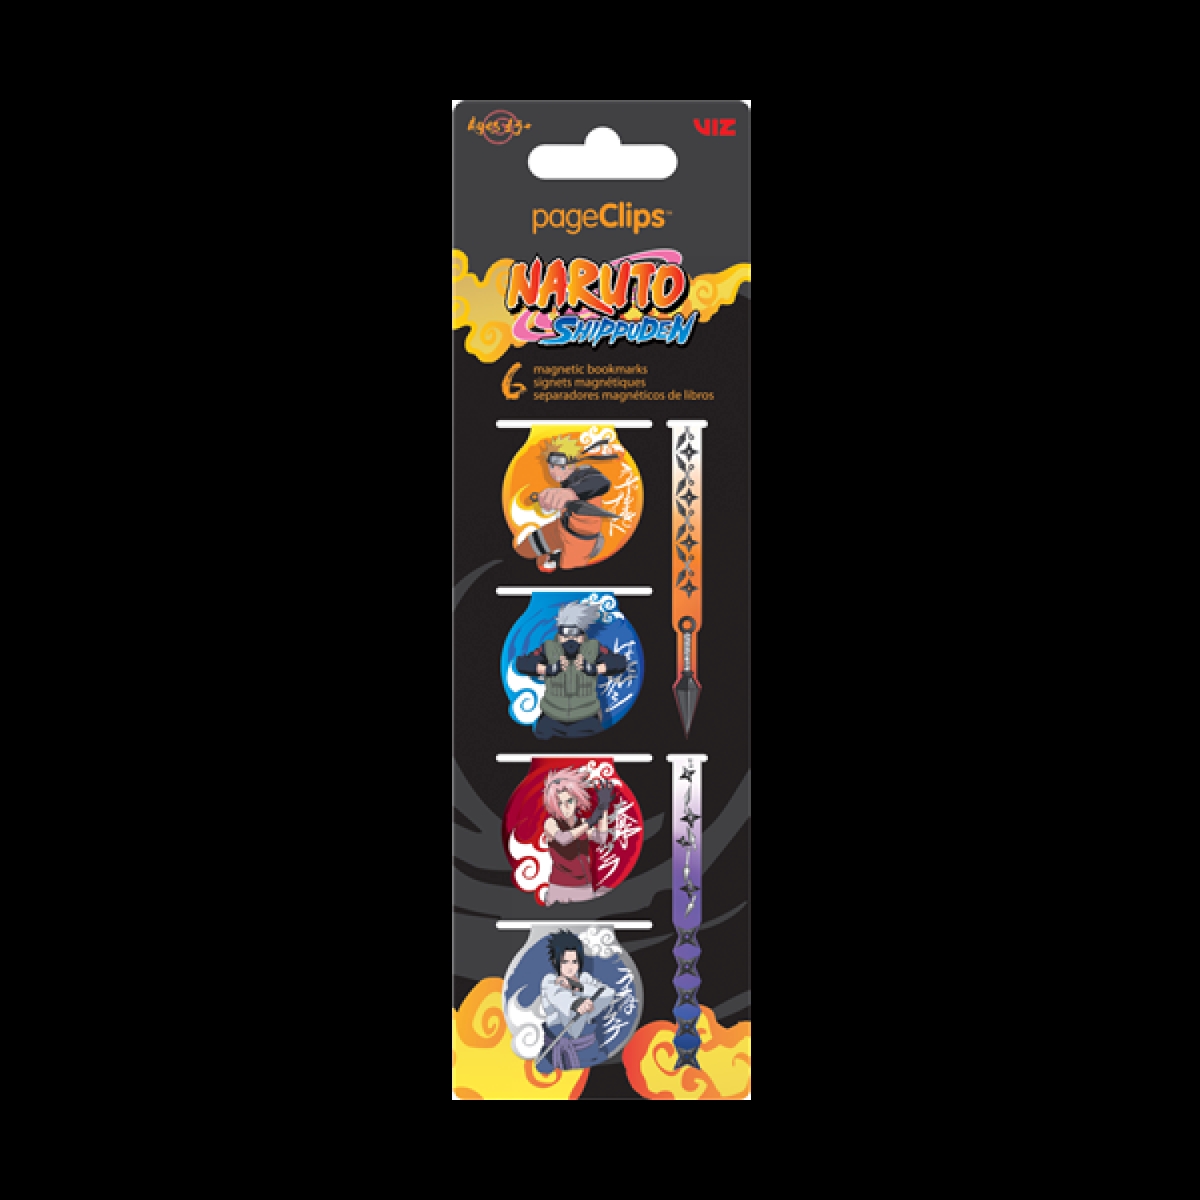 Picture of Naruto 877832 Naruto Shippuden Characters Magnetic Page Clip Bookmarks - Pack of 6